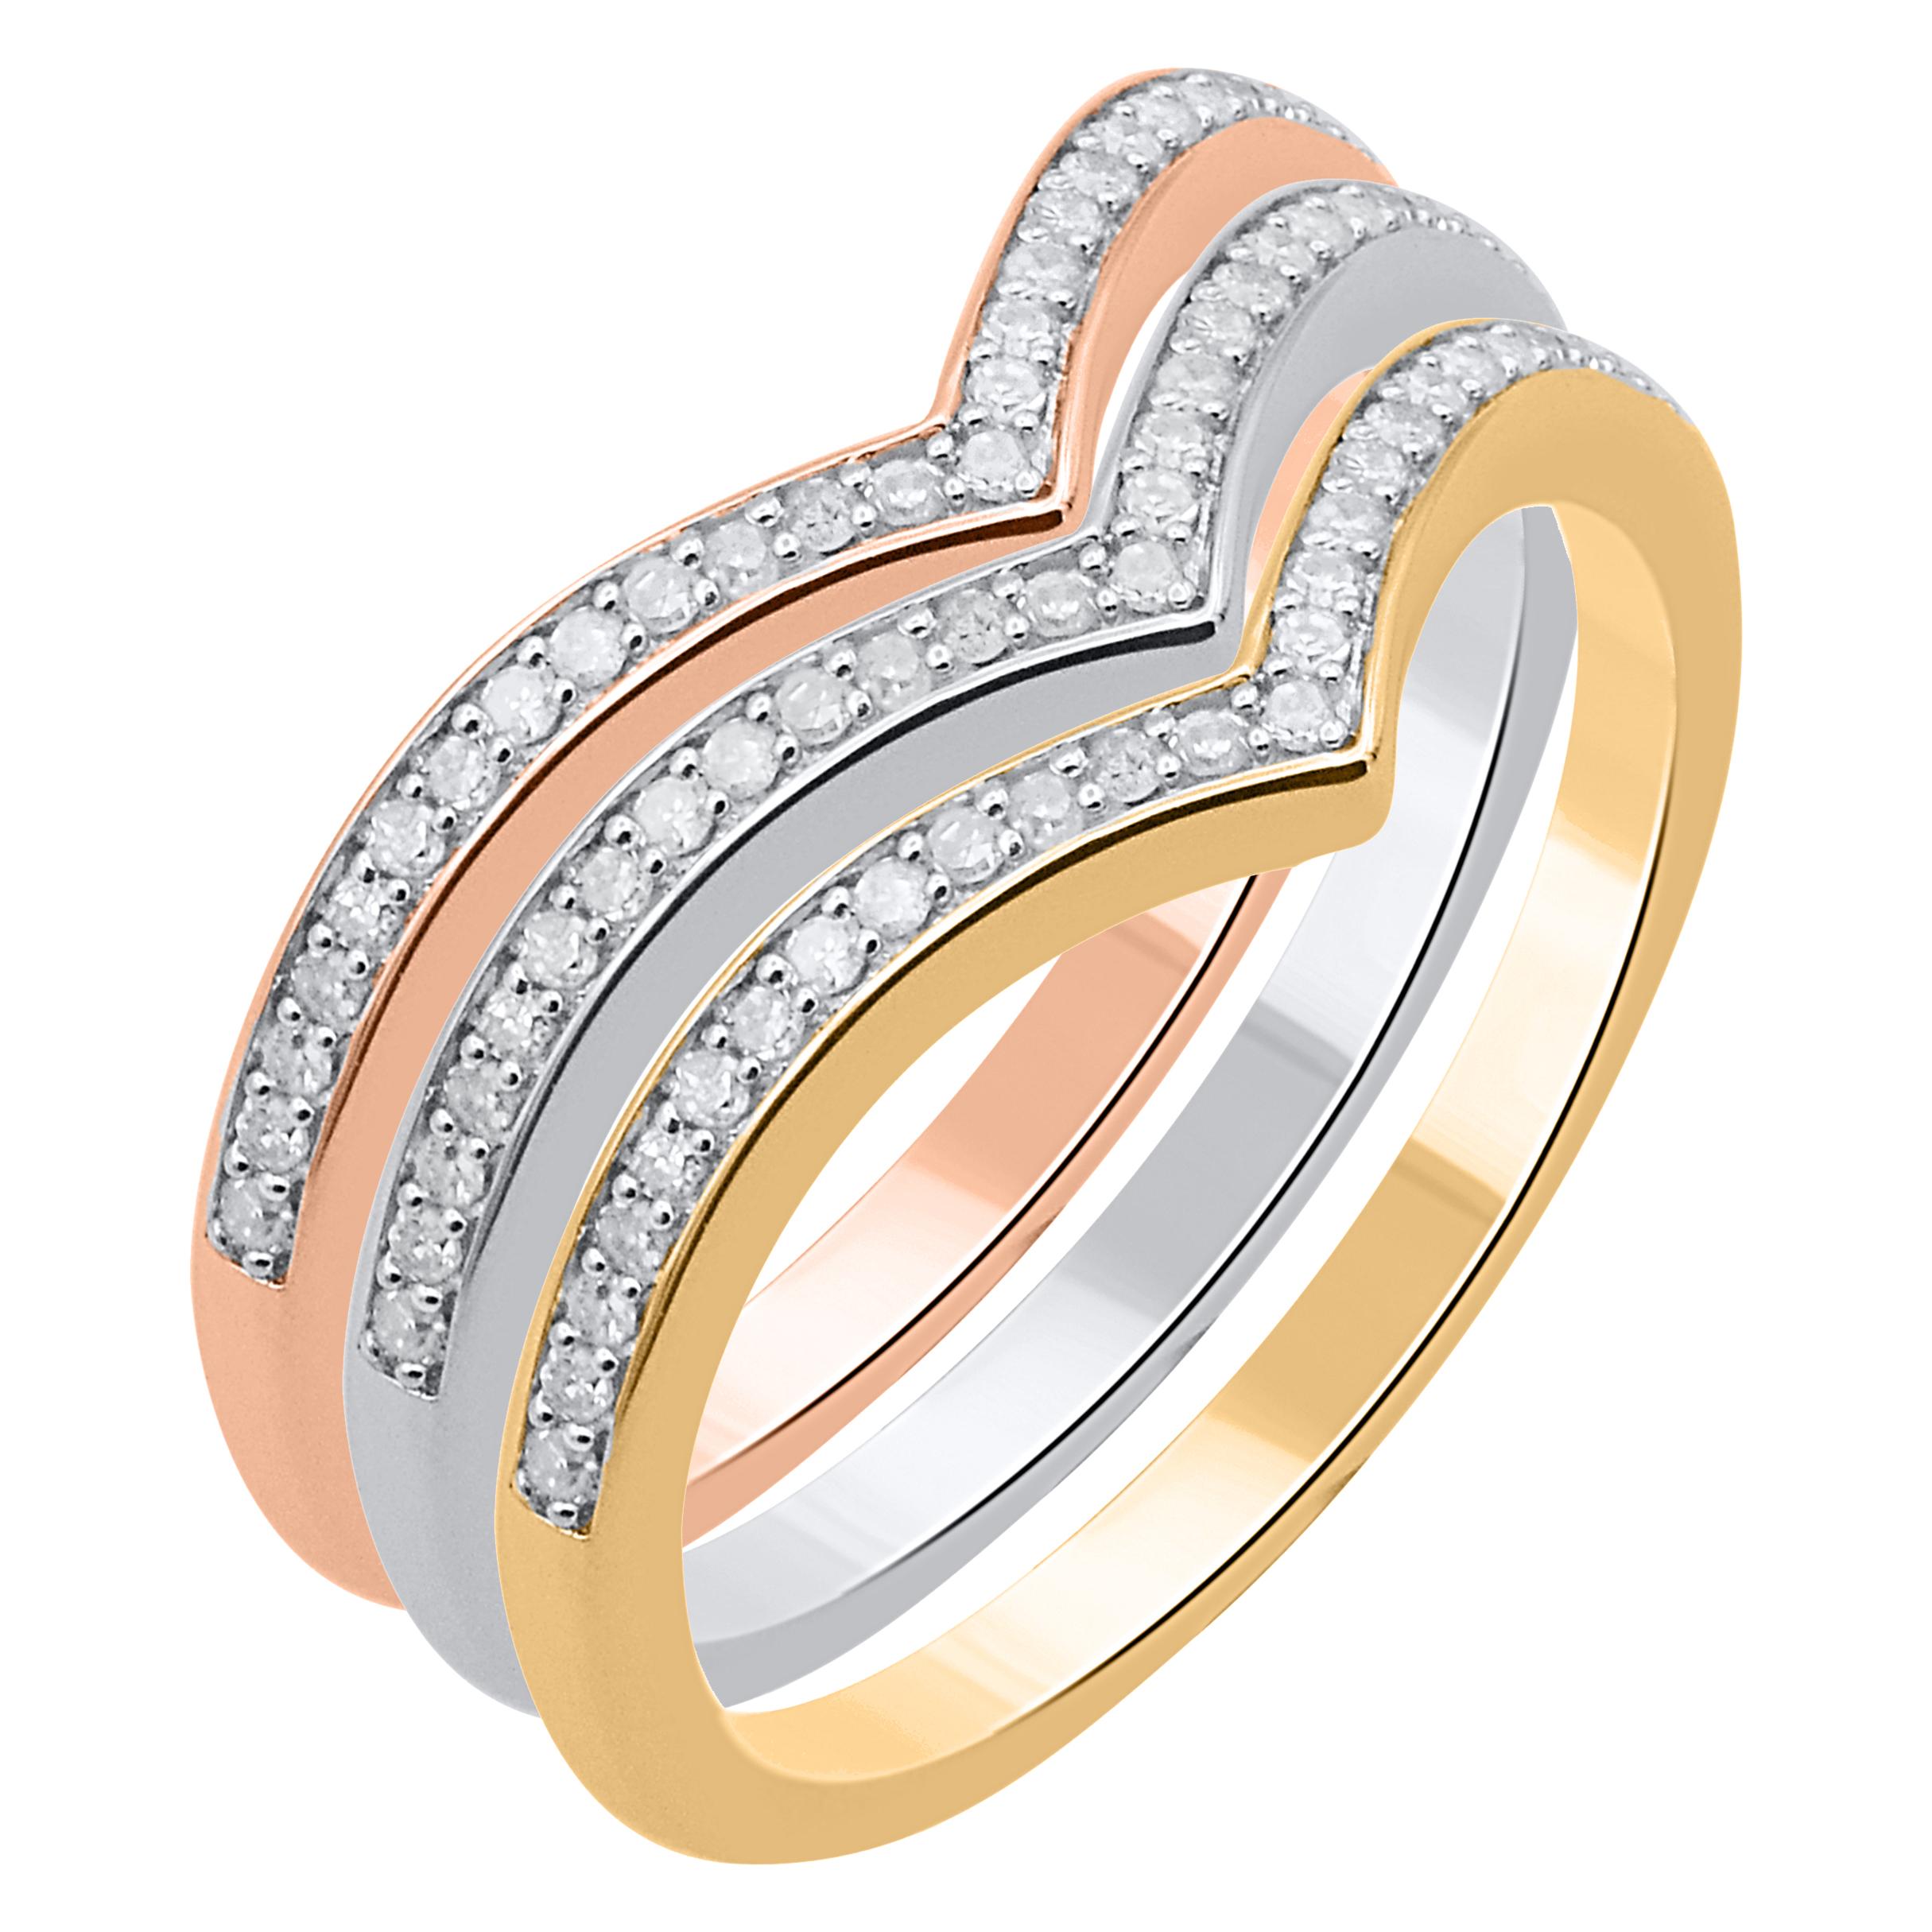 This three-piece diamond band set is a look she'll turn to often. This set includes one piece each rose, yellow and white gold. This ring is beautifully crafted in 14 Karat white, rose and yellow gold and embedded with 81 single cut round diamond